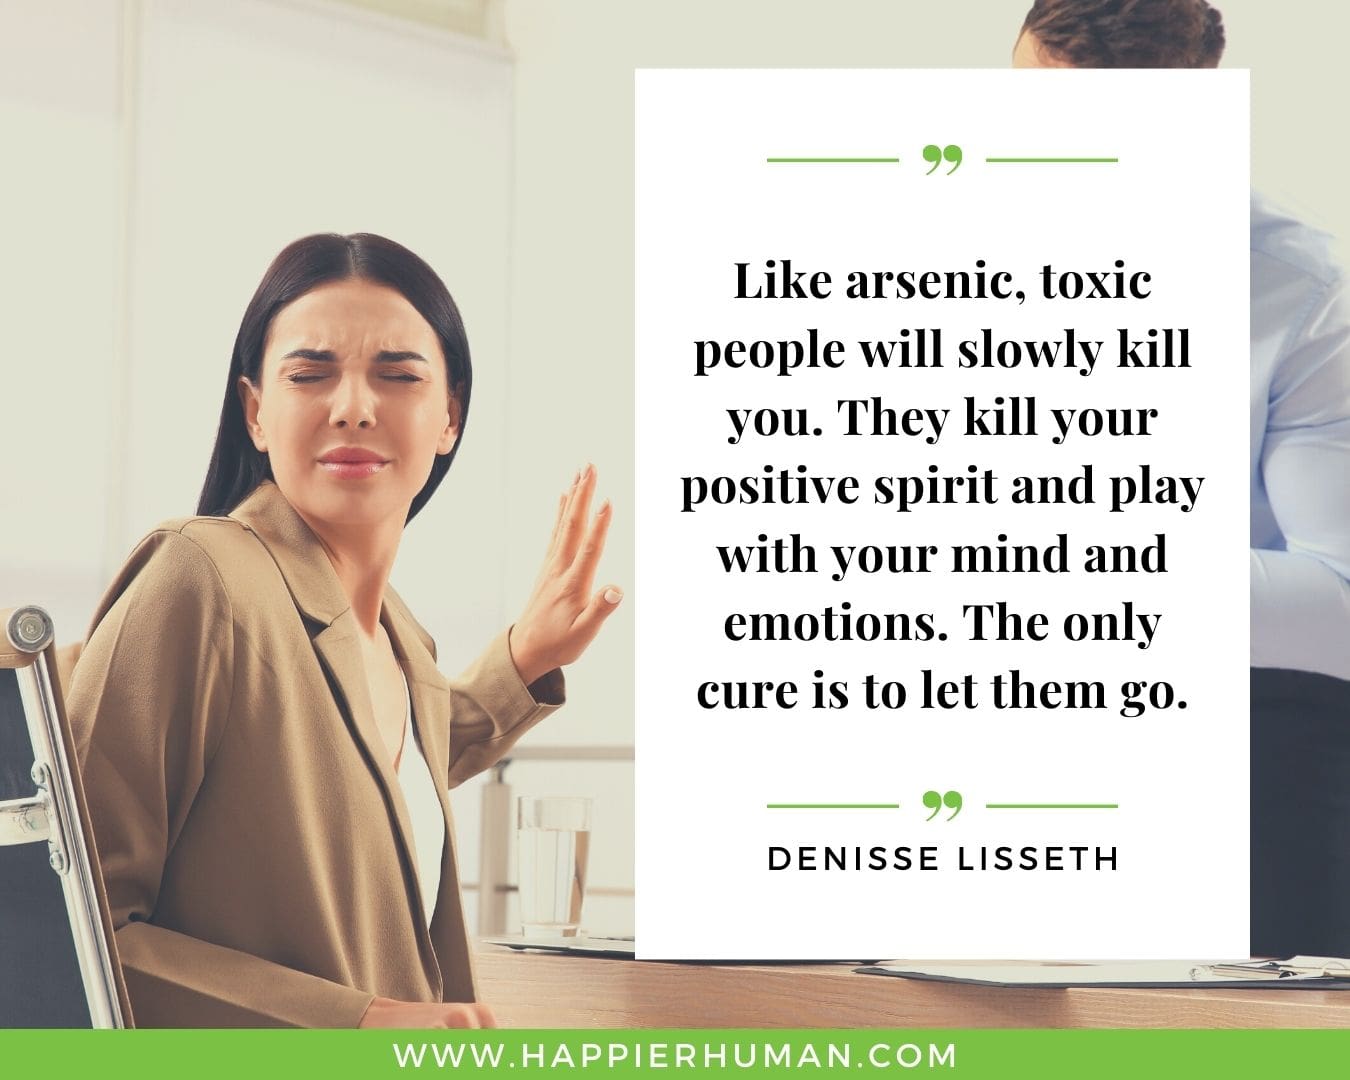 Toxic People Quotes - “Like arsenic, toxic people will slowly kill you. They kill your positive spirit and play with your mind and emotions. The only cure is to let them go.” – Denisse Lisseth